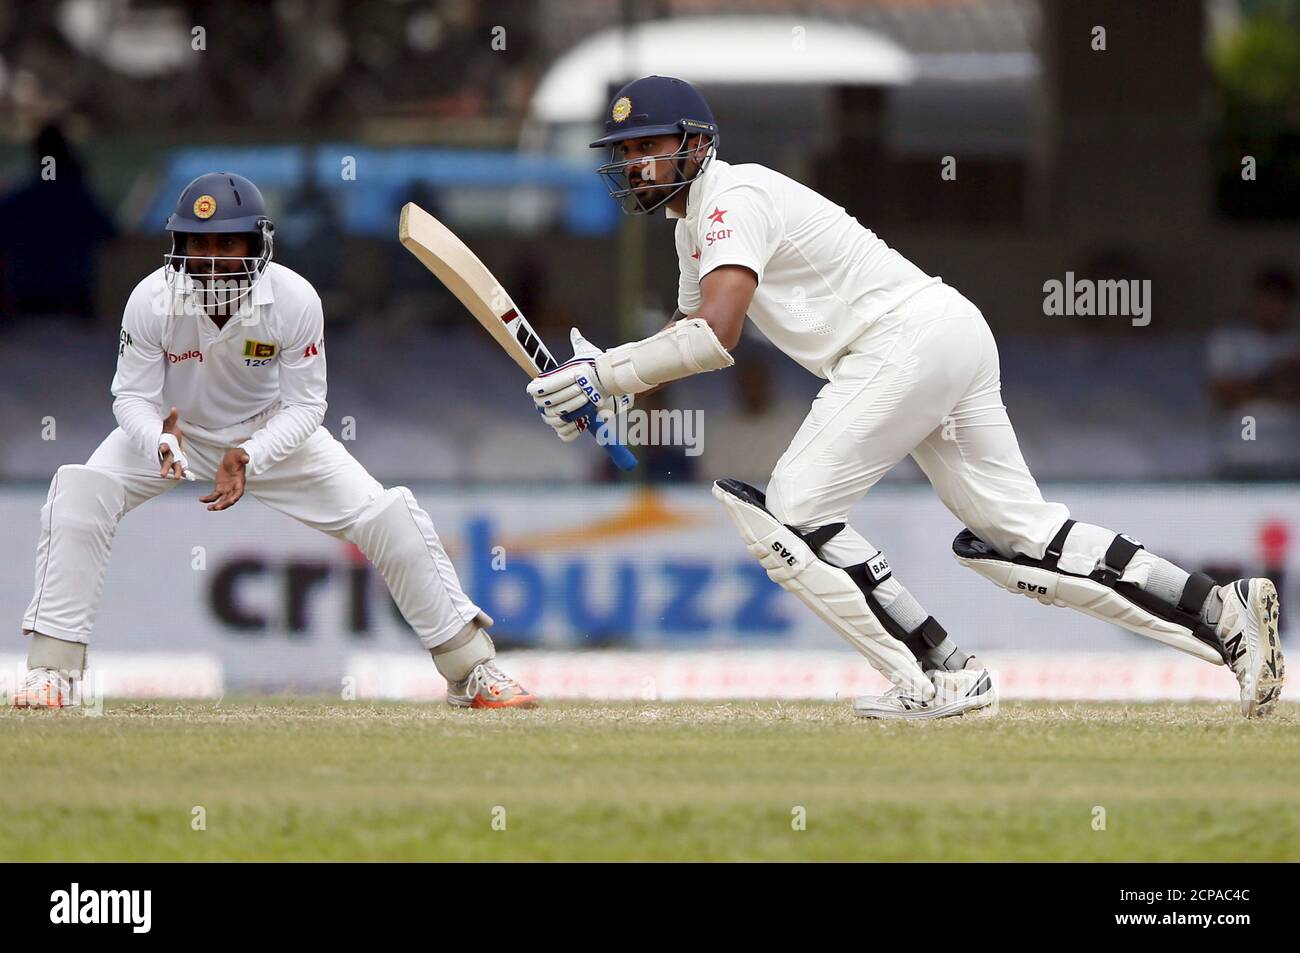 India's Murali Vijay (R) watches his shot next to Sri Lanka's Kaushal Silva on the fourth day of their second test cricket match in Colombo August 23, 2015. REUTERS/Dinuka Liyanawatte Stock Photo